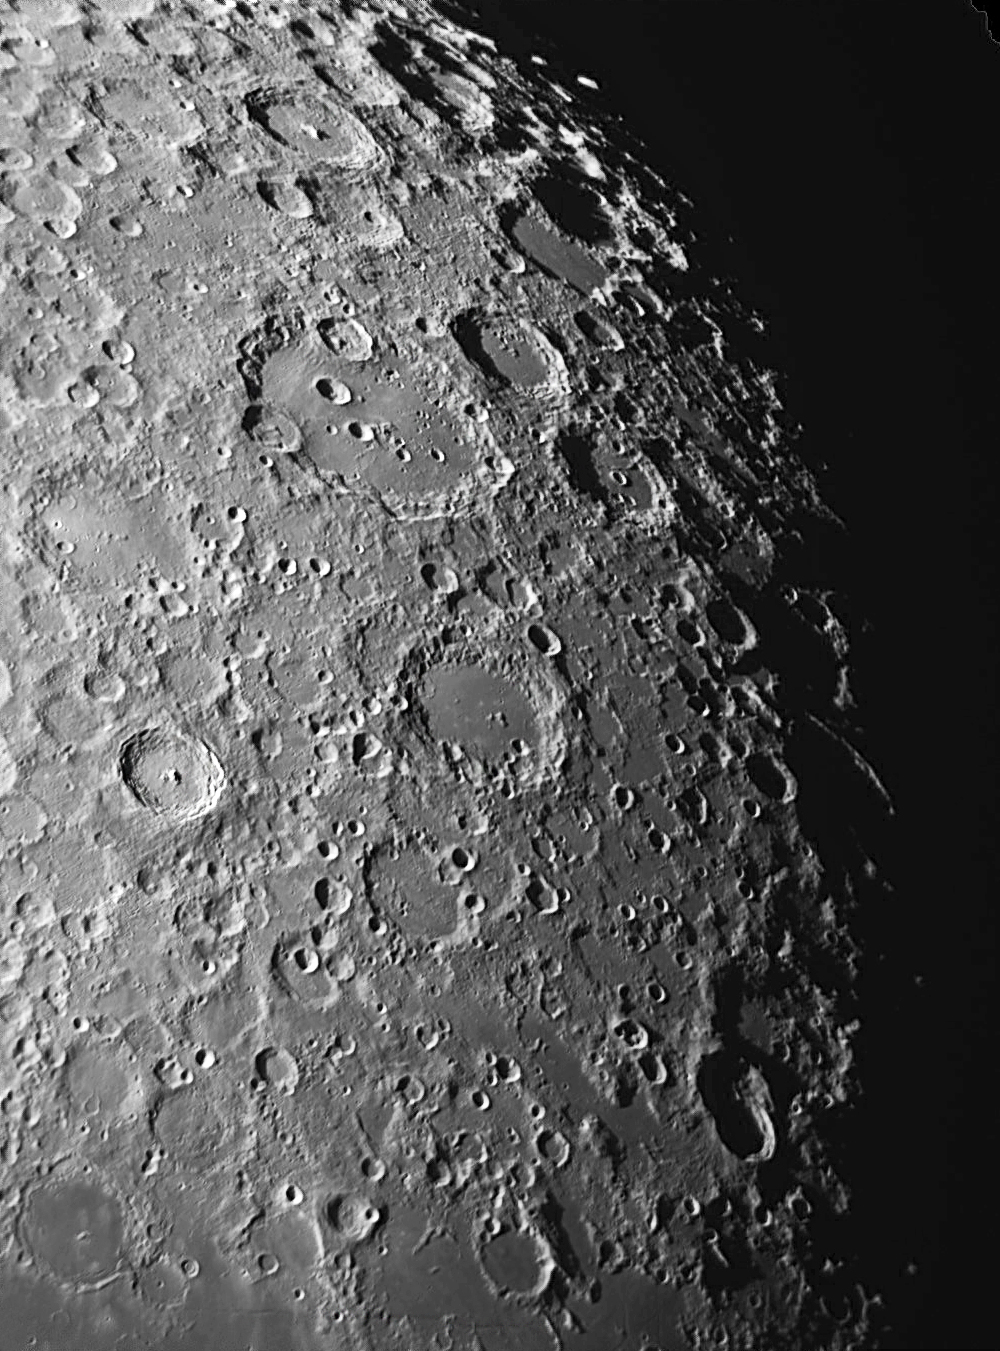 Clavius by Ken Kennedy April 2020